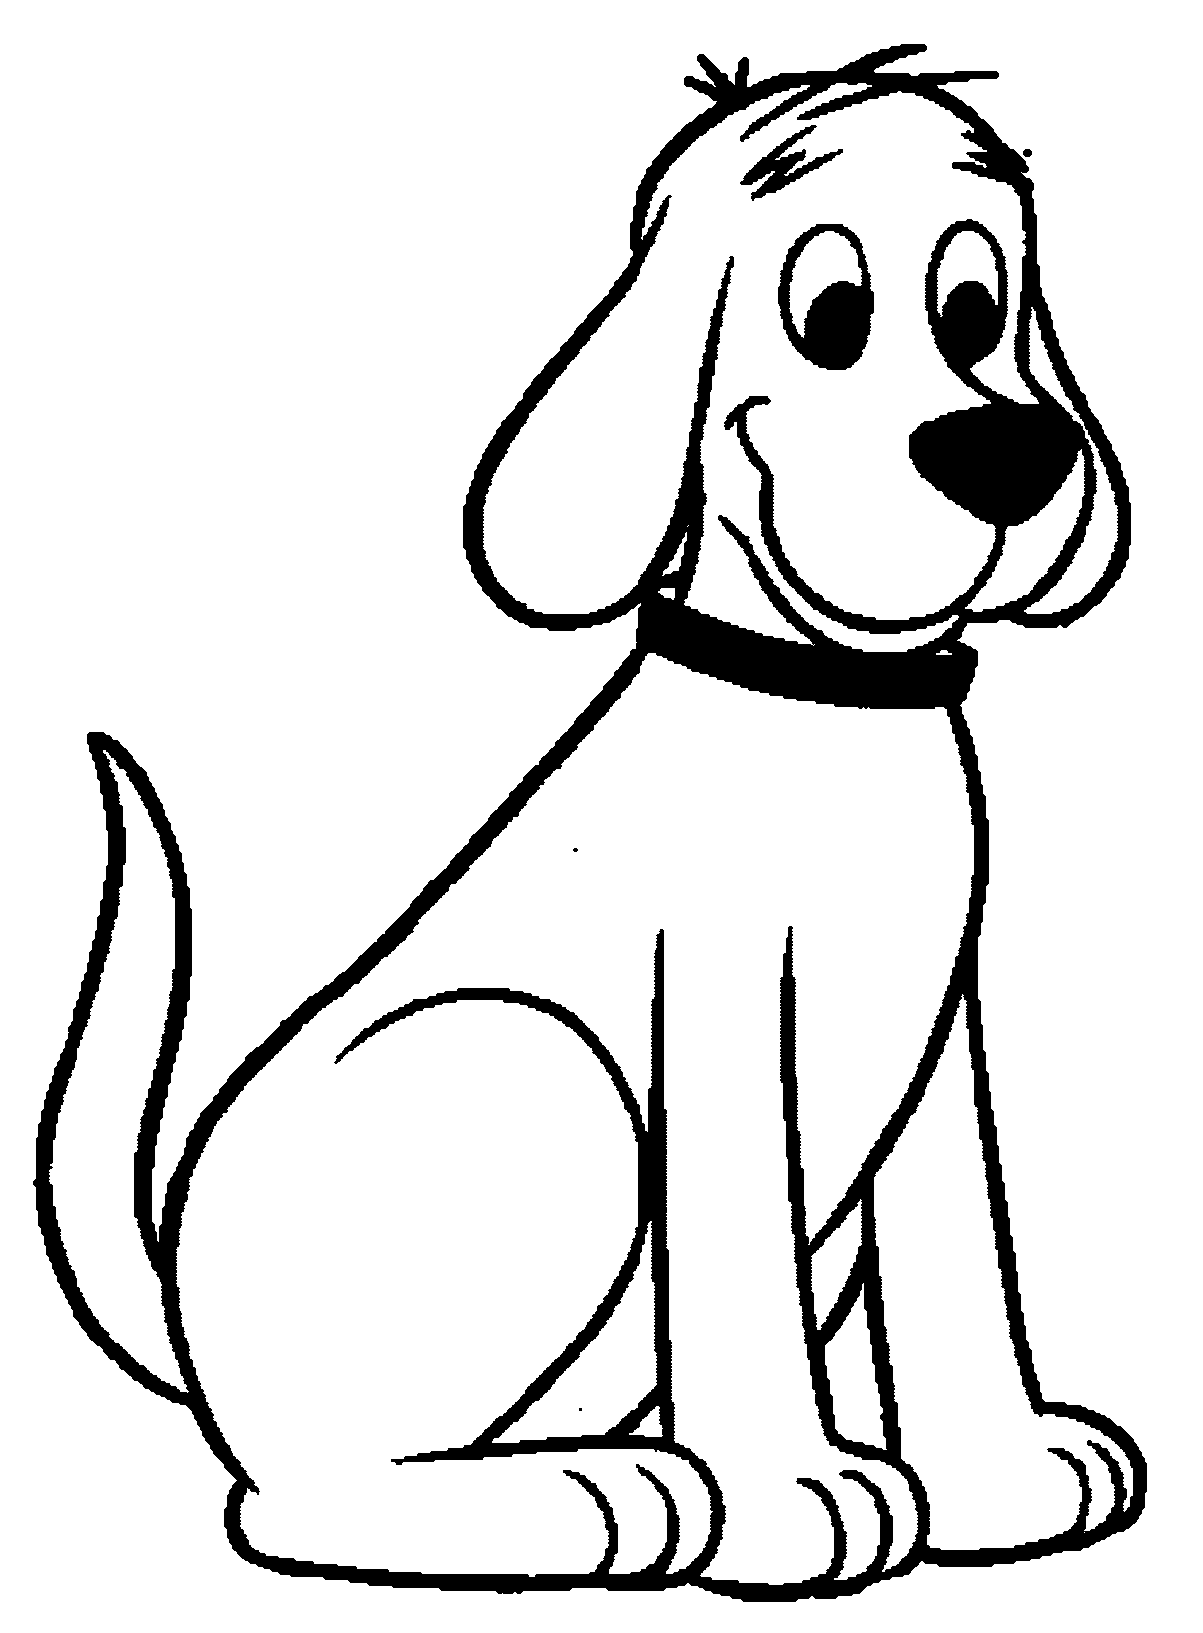 free dog coloring pages 9 puppy coloring pages jpg ai illustrator download coloring pages dog free 